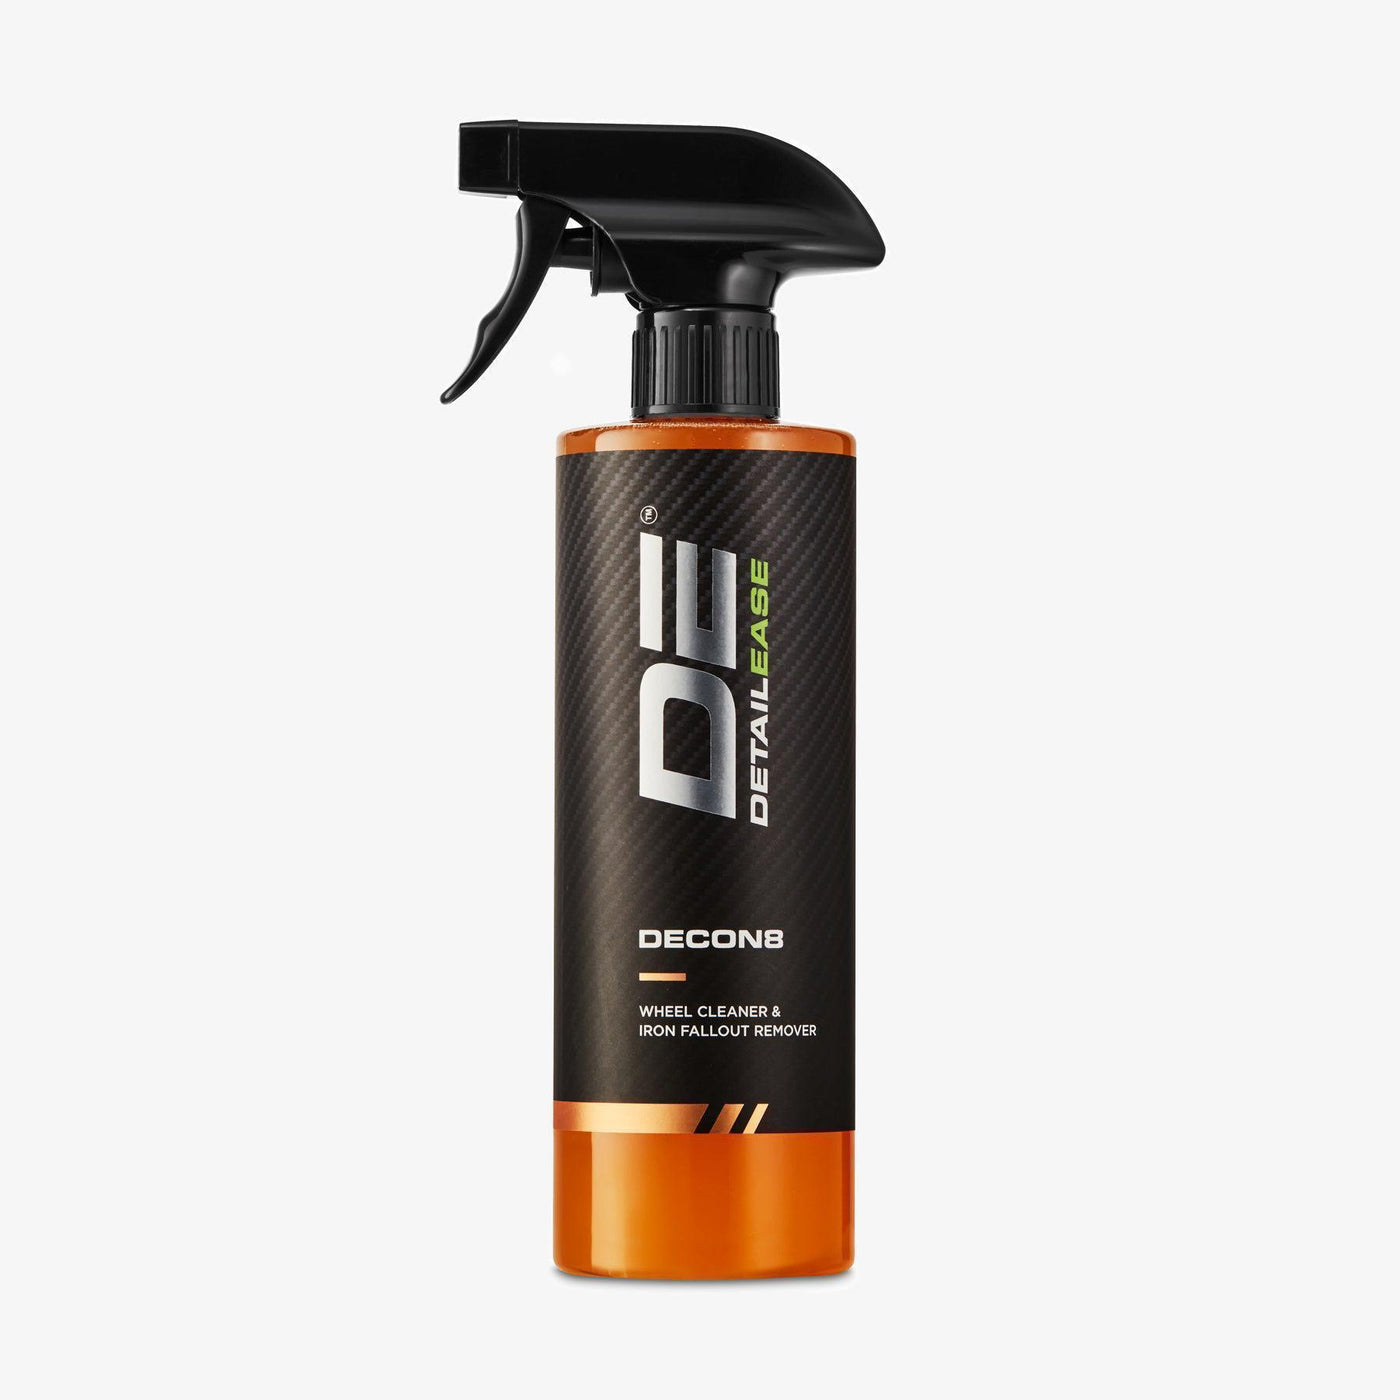 Decon8 - Wheel Cleaner & Iron Fallout Remover